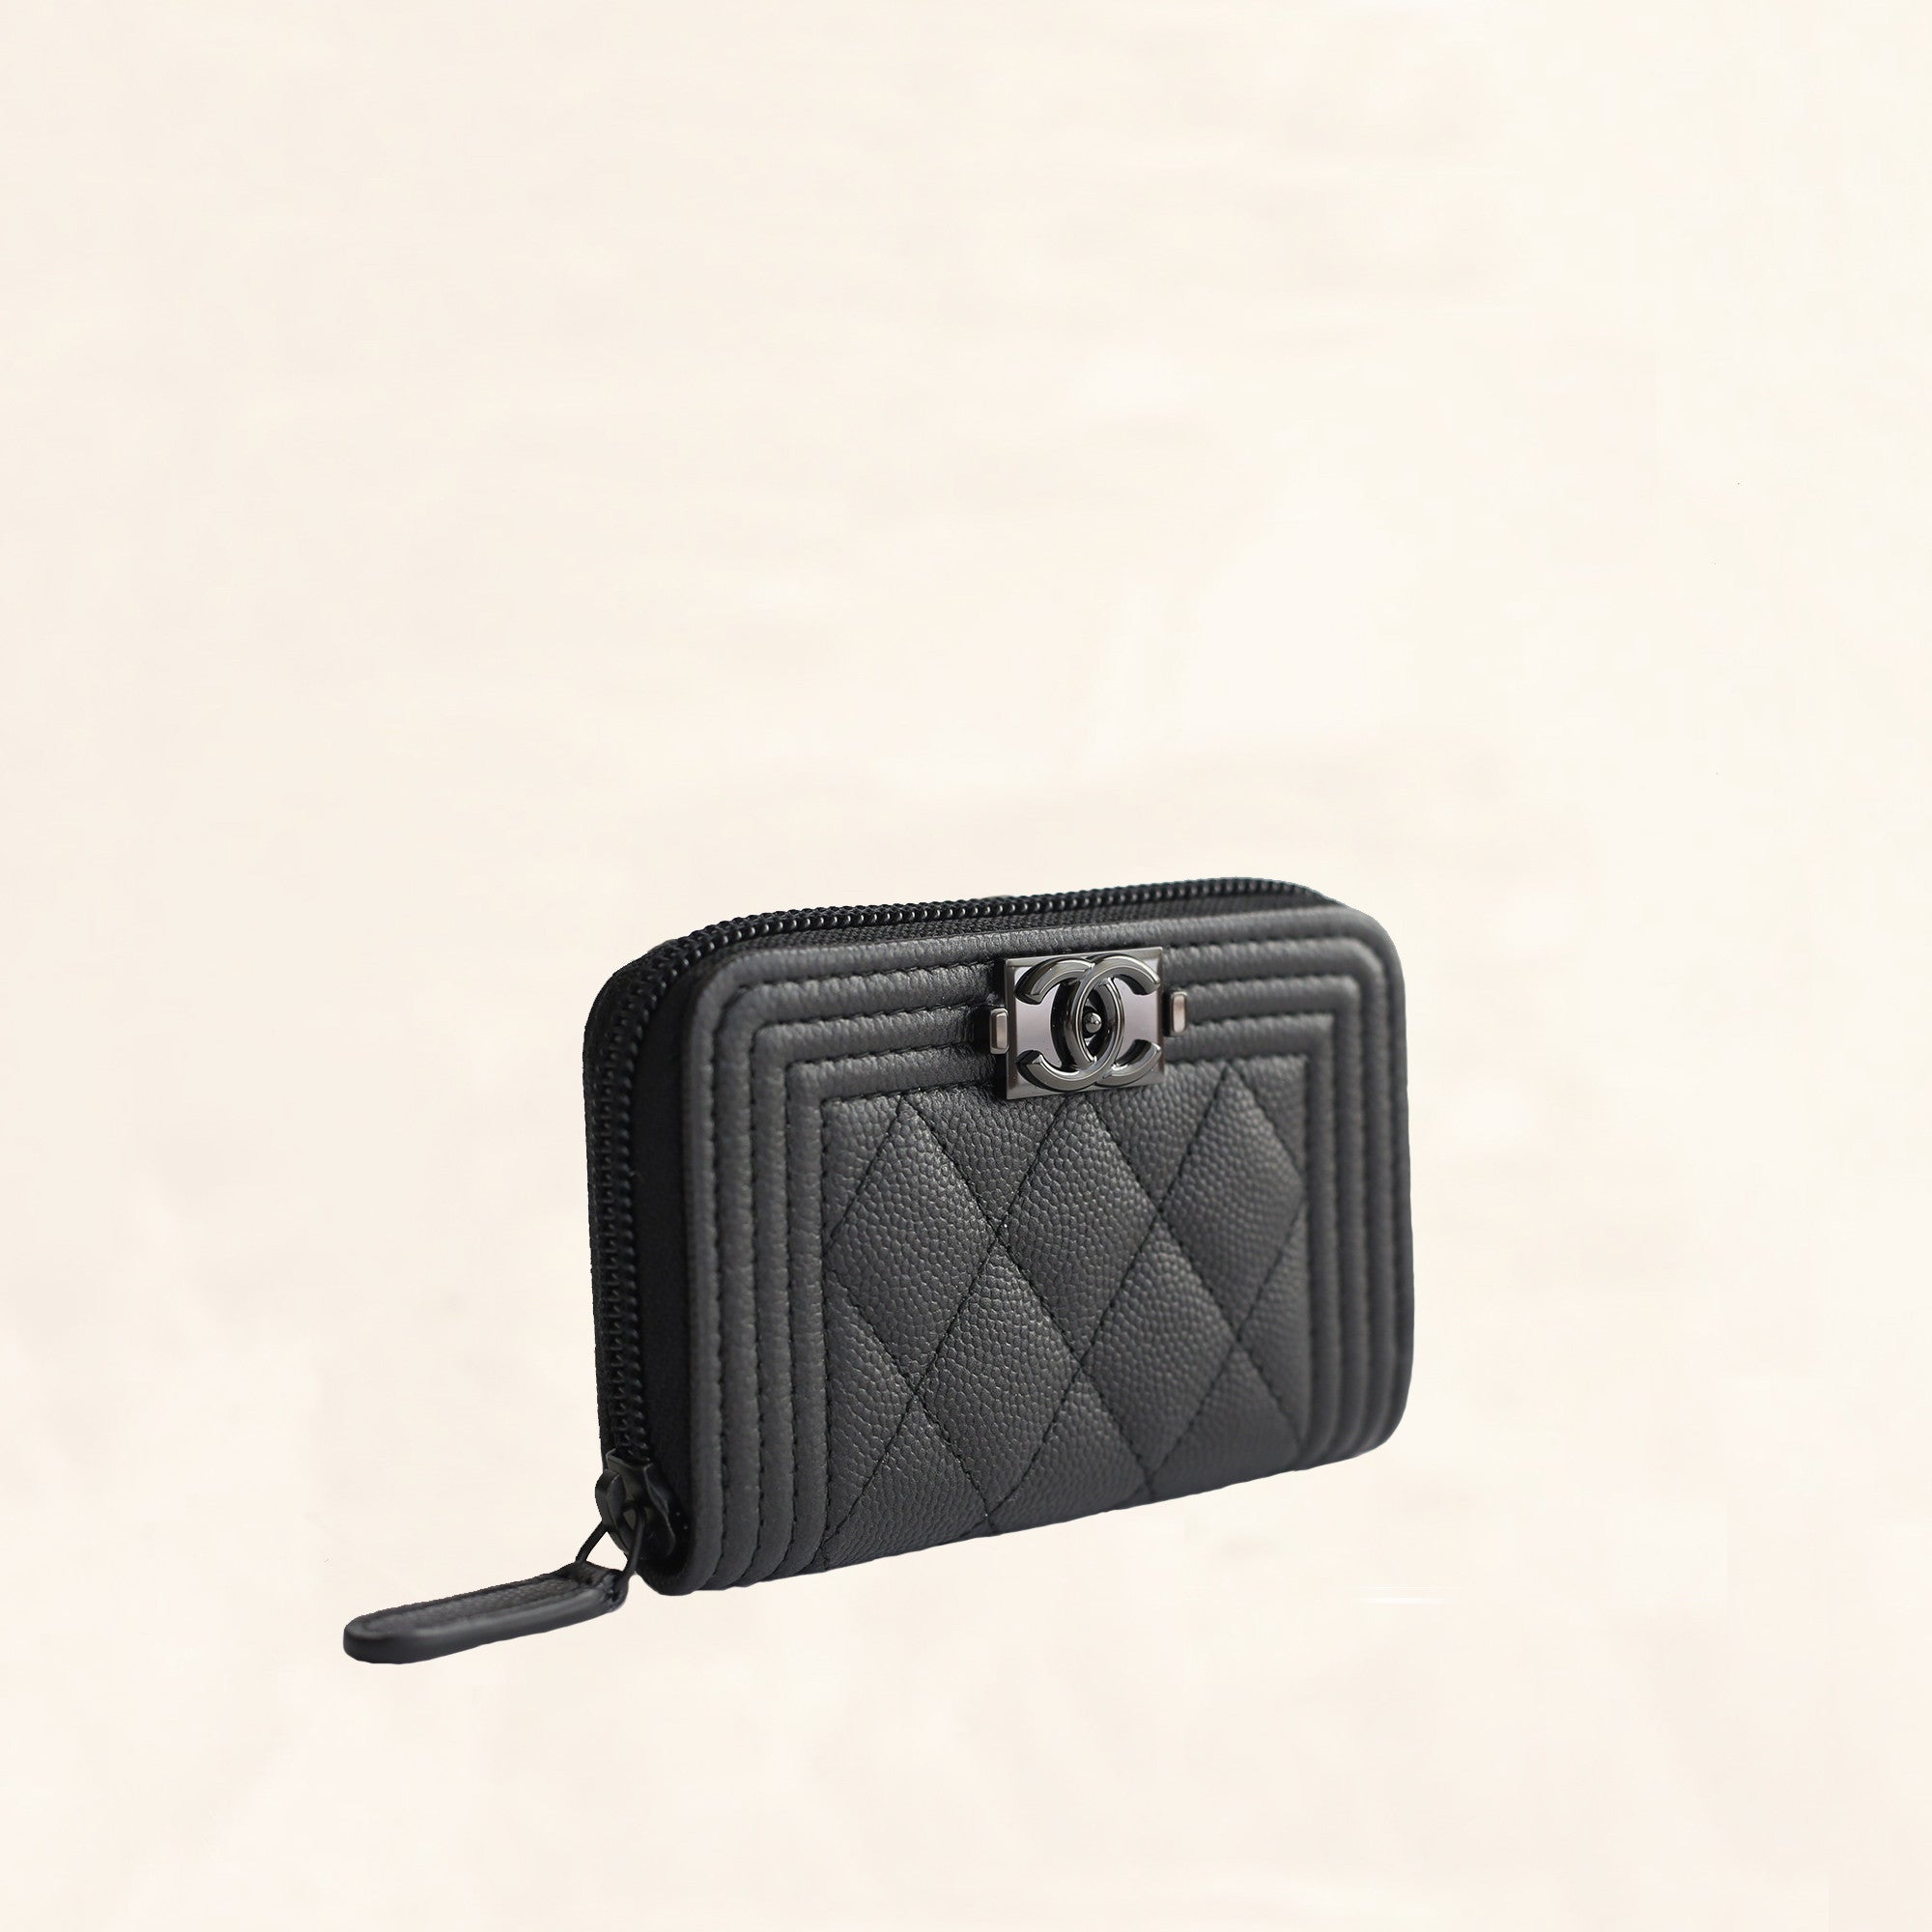 Chanel Boy Chanel Womens Coin Cases 2021-22FW, Black